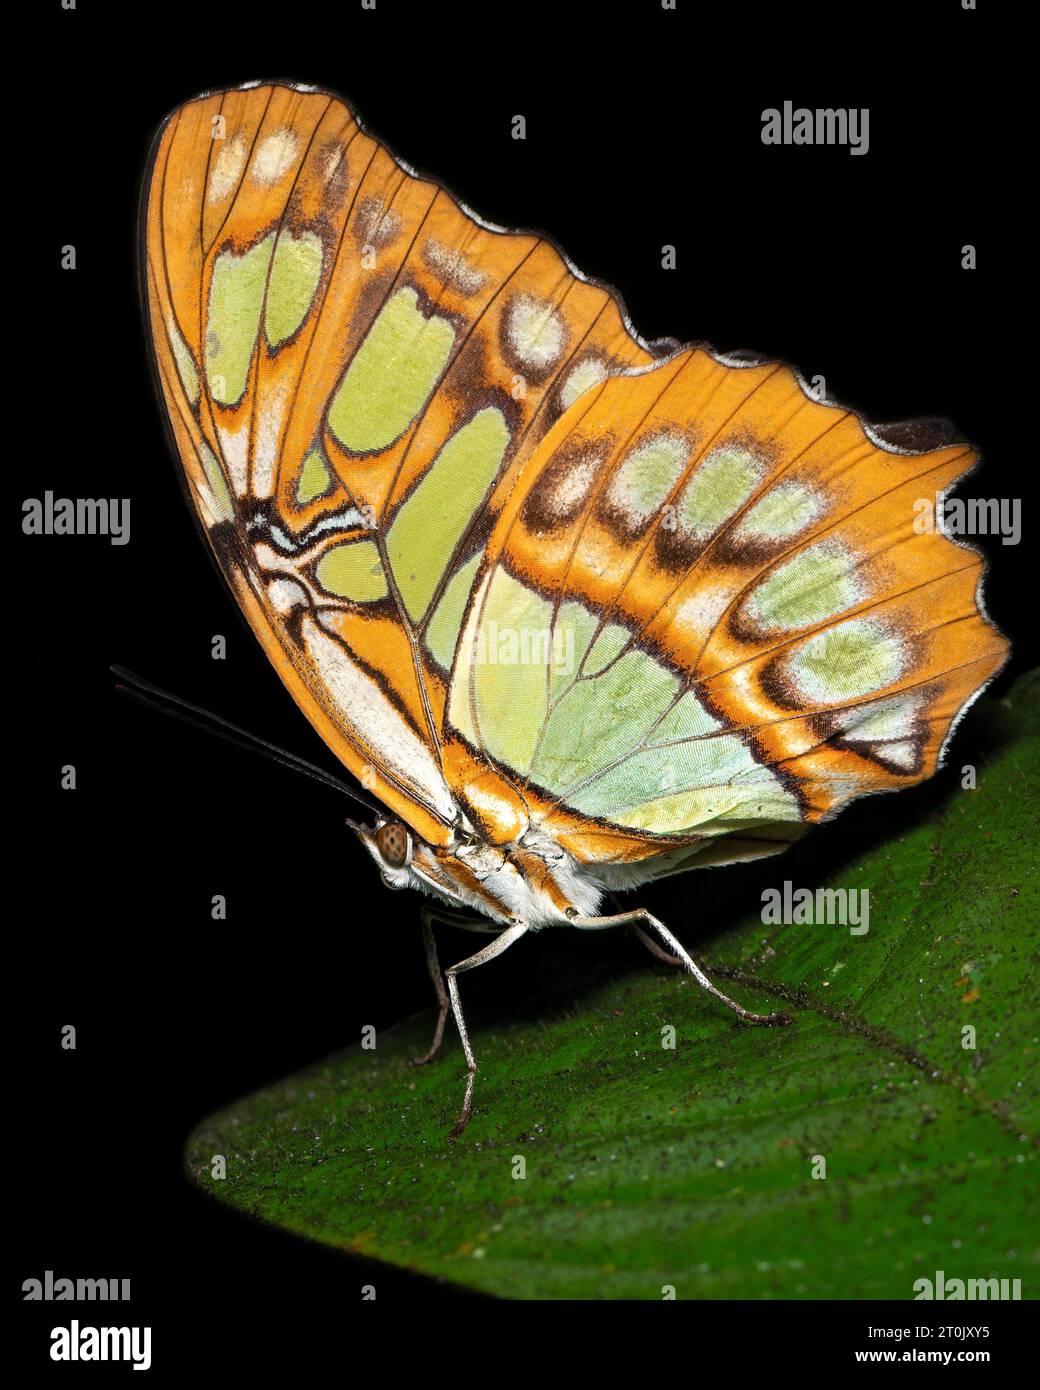 https://c8.alamy.com/comp/2T0JXY5/siproeta-stelenes-malachite-is-a-neotropical-brush-footed-butterfly-family-nymphalidae-2T0JXY5.jpg